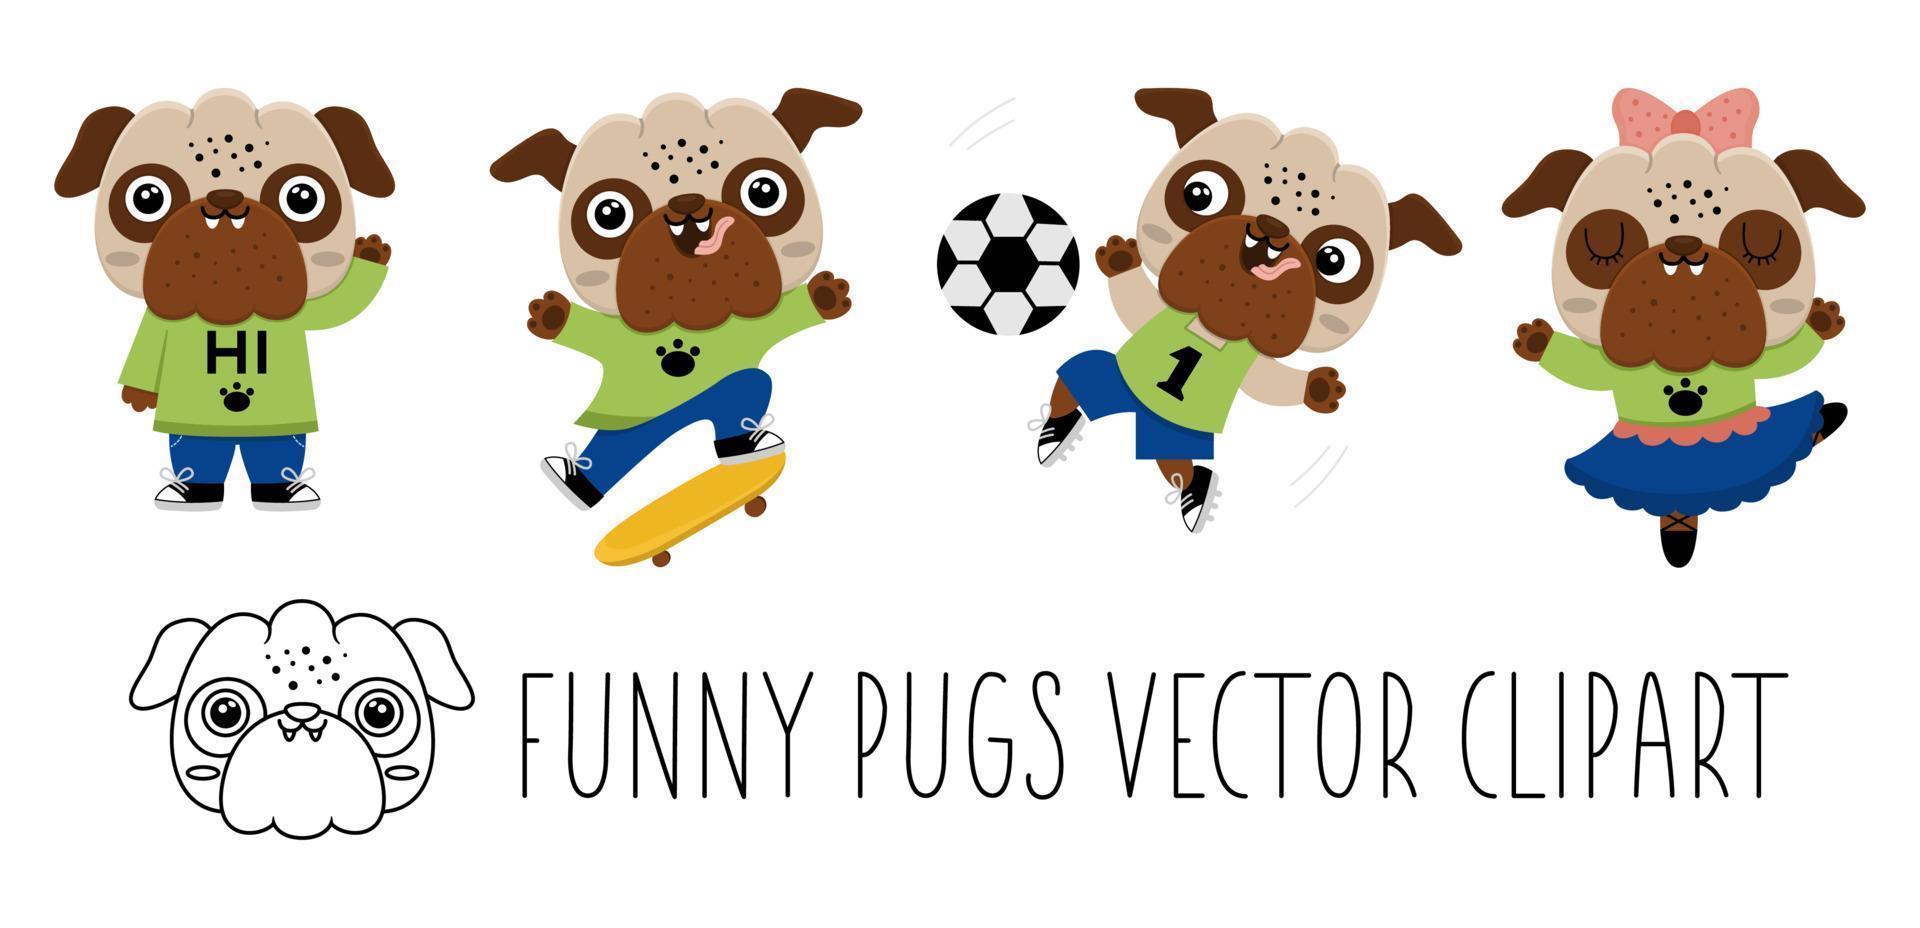 Vector cartoon pugs set. Anthropomorphic dogs doing sports. Funny pup playing football, skating, dancing, waving hand. Cute animal illustration for kids. Funny little pet icons collection